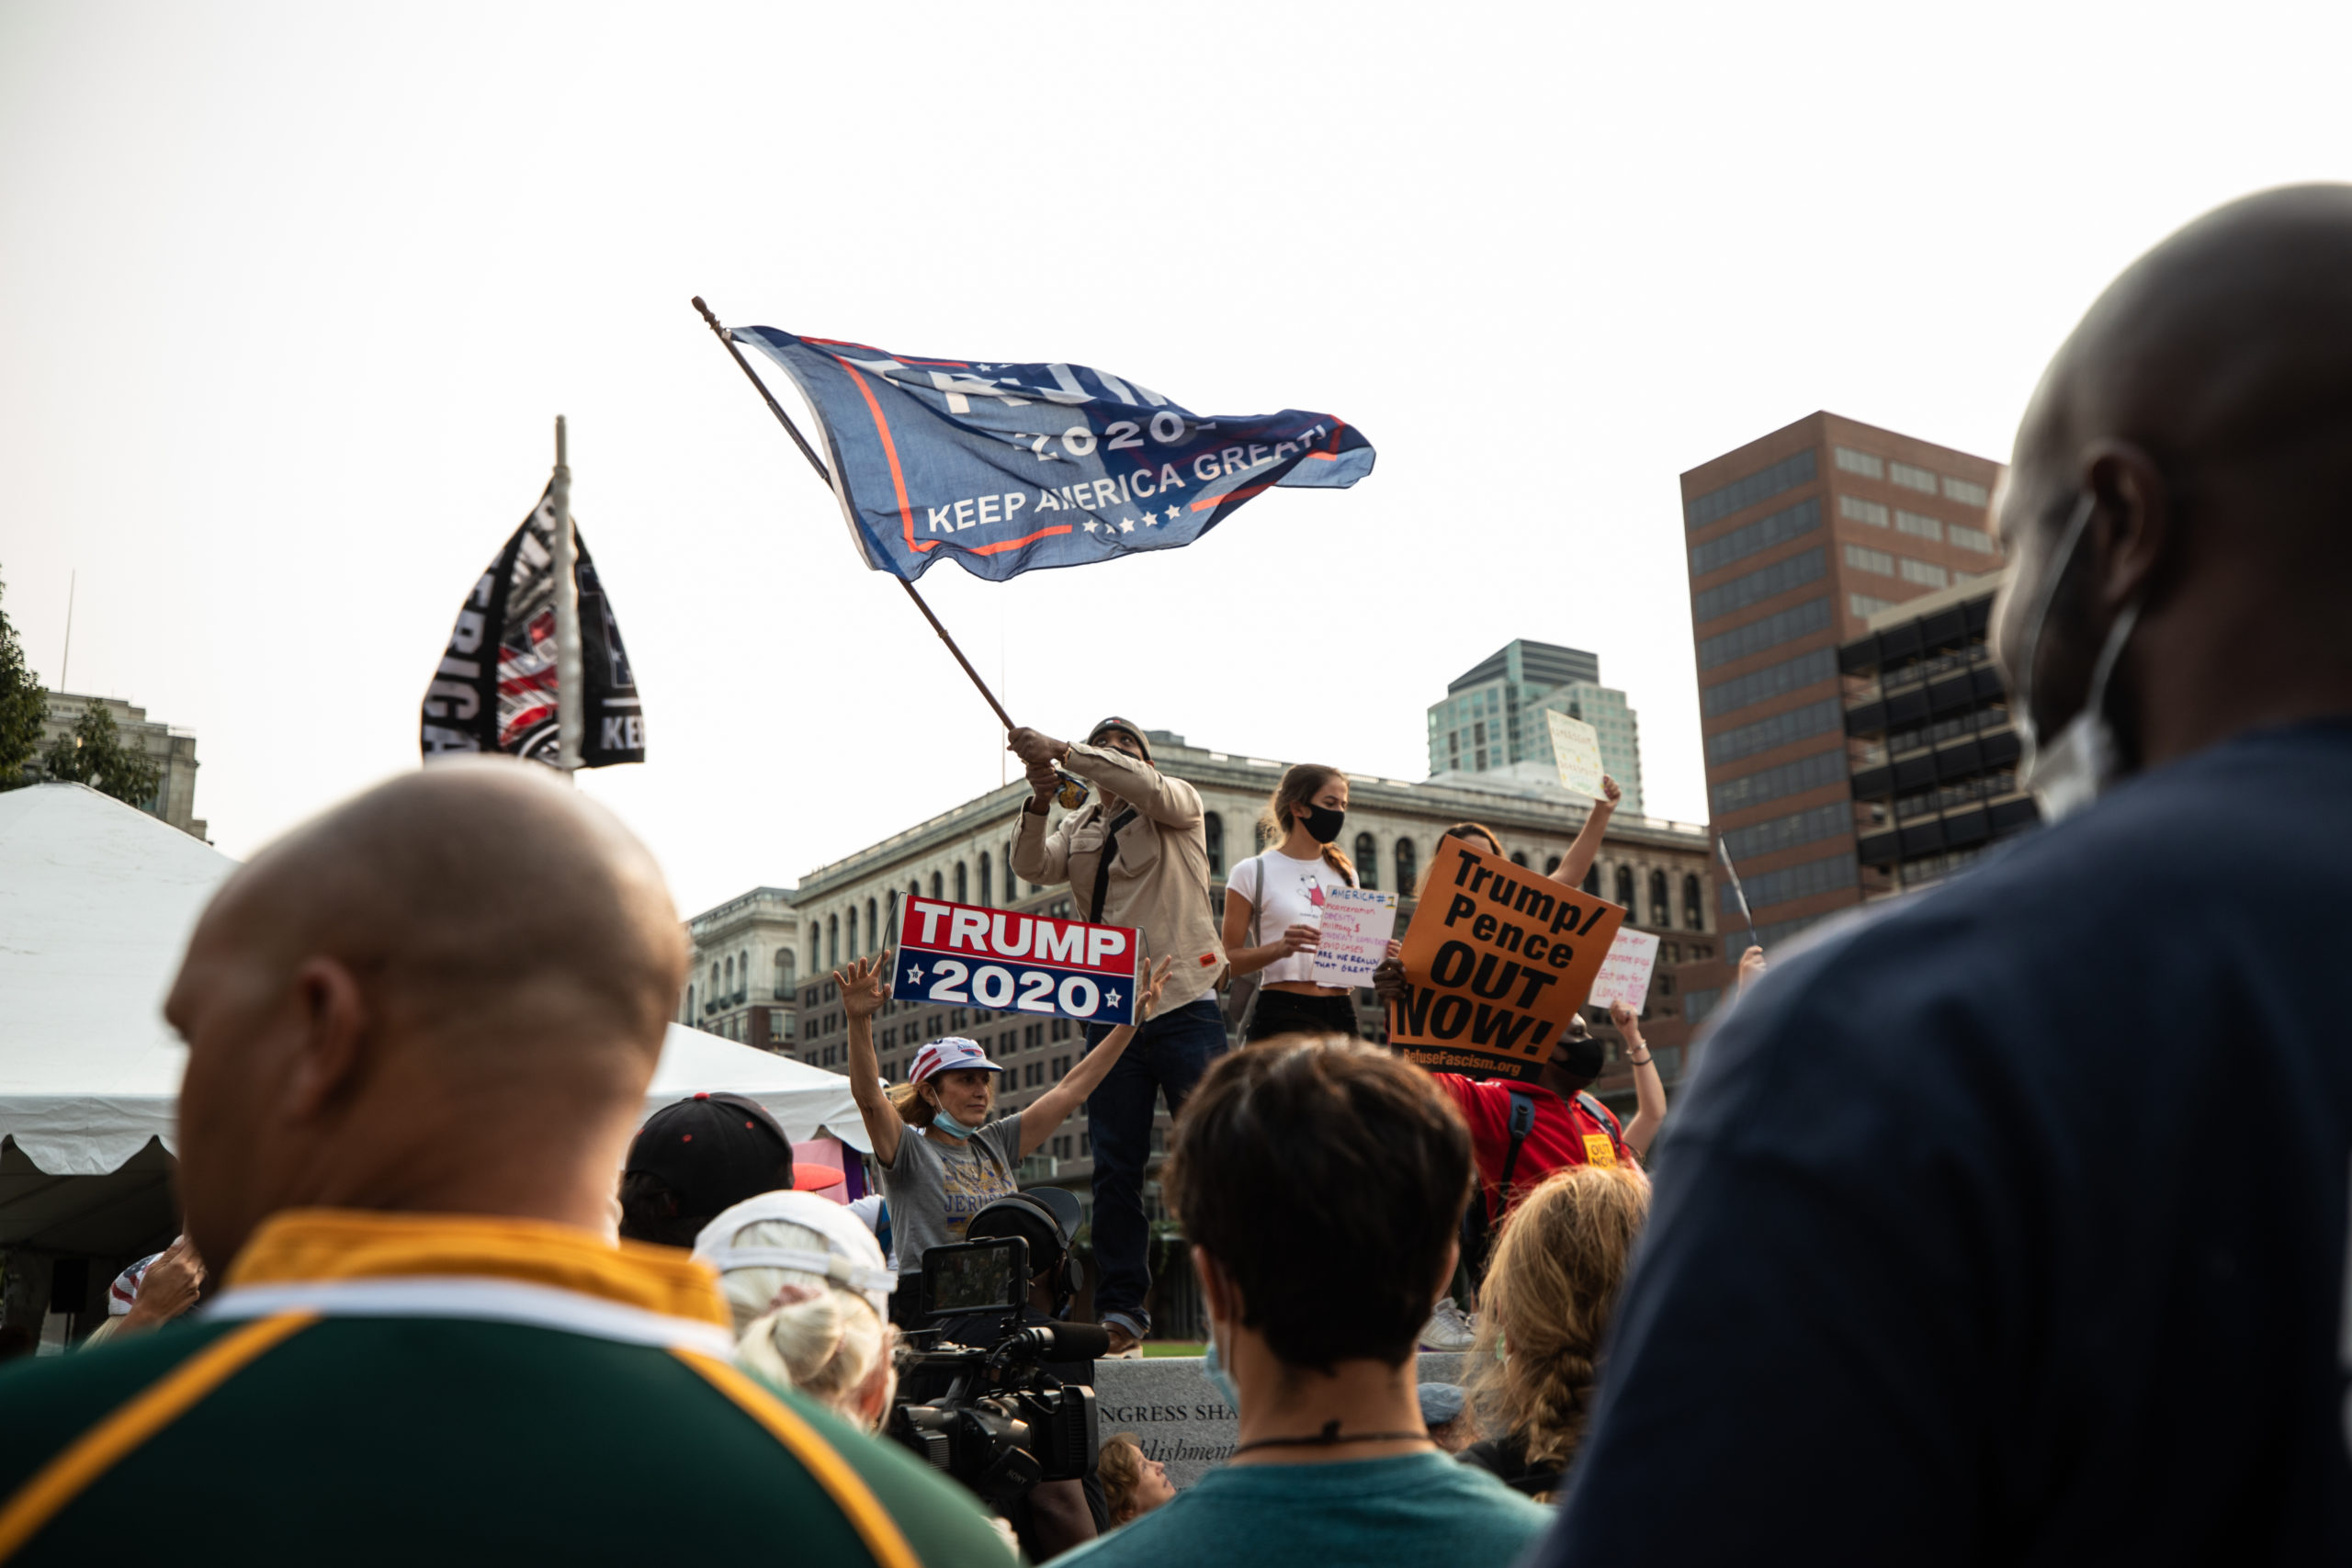 Trump supporters wave a "Trump 2020" flag while standing on an elevated surface in Philadelphia, Pennsylvania on Sept. 15, 2020. (Photo: Kaylee Greenlee / DCNF)